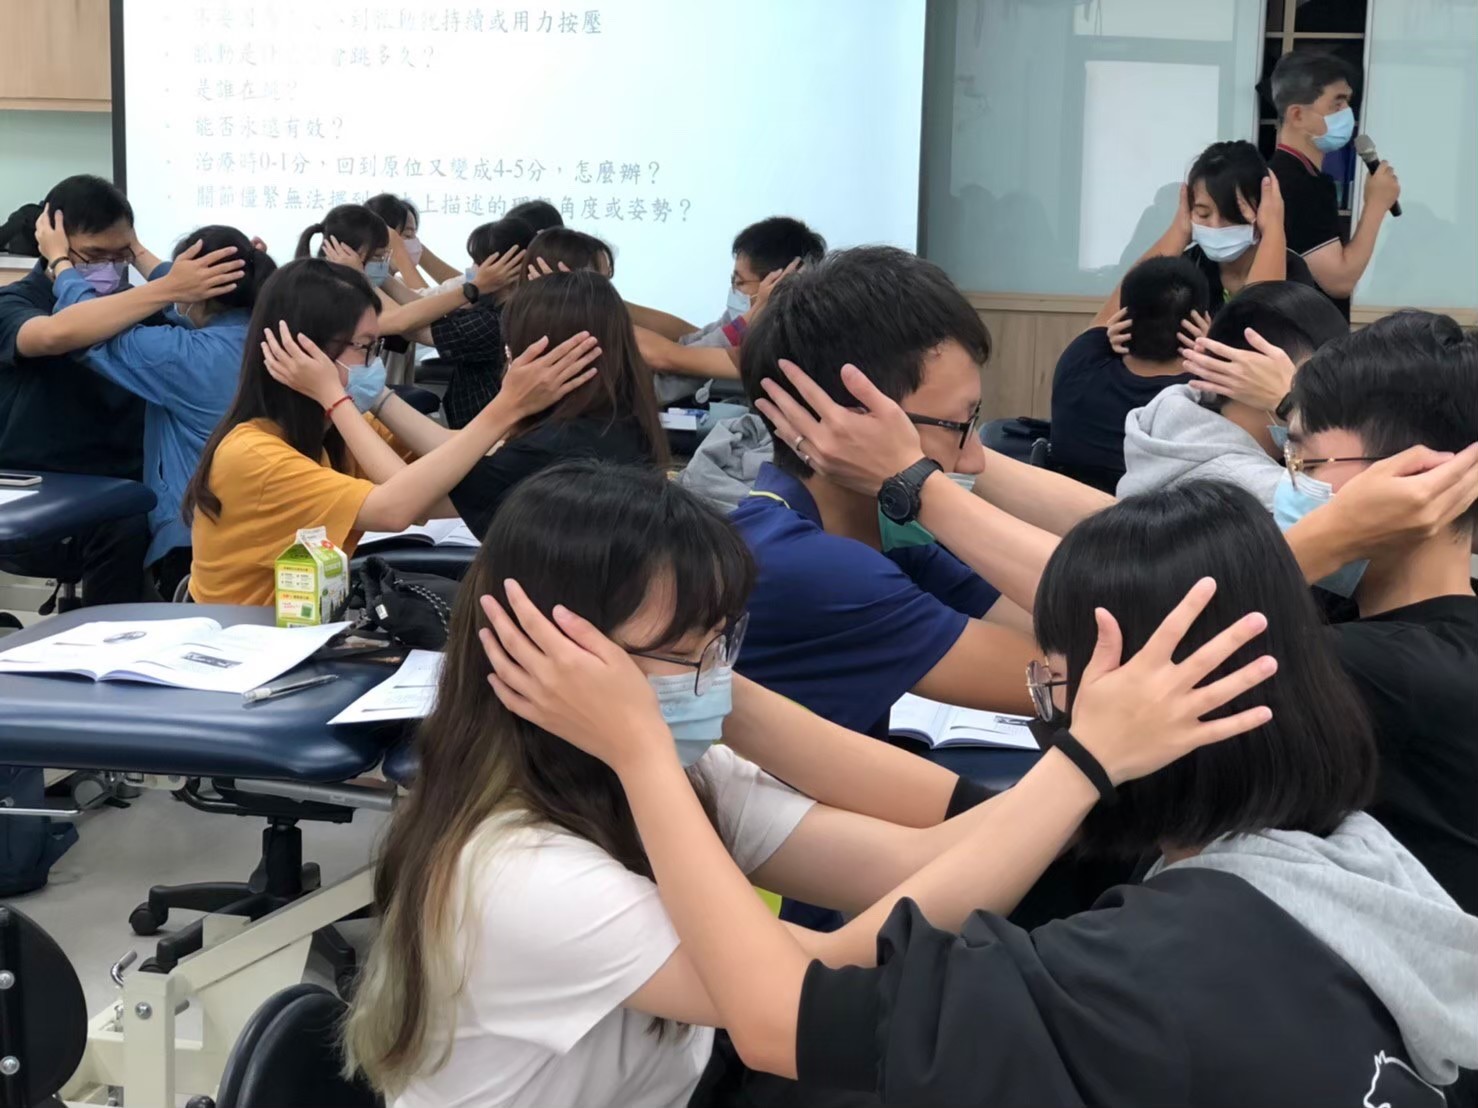 The first batch of graduates from Department of Physical Therapy at Asia University demonstrated a high pass rate in the physical therapist examination. The image captures students engaging in interactive practice sessions during a classroom session